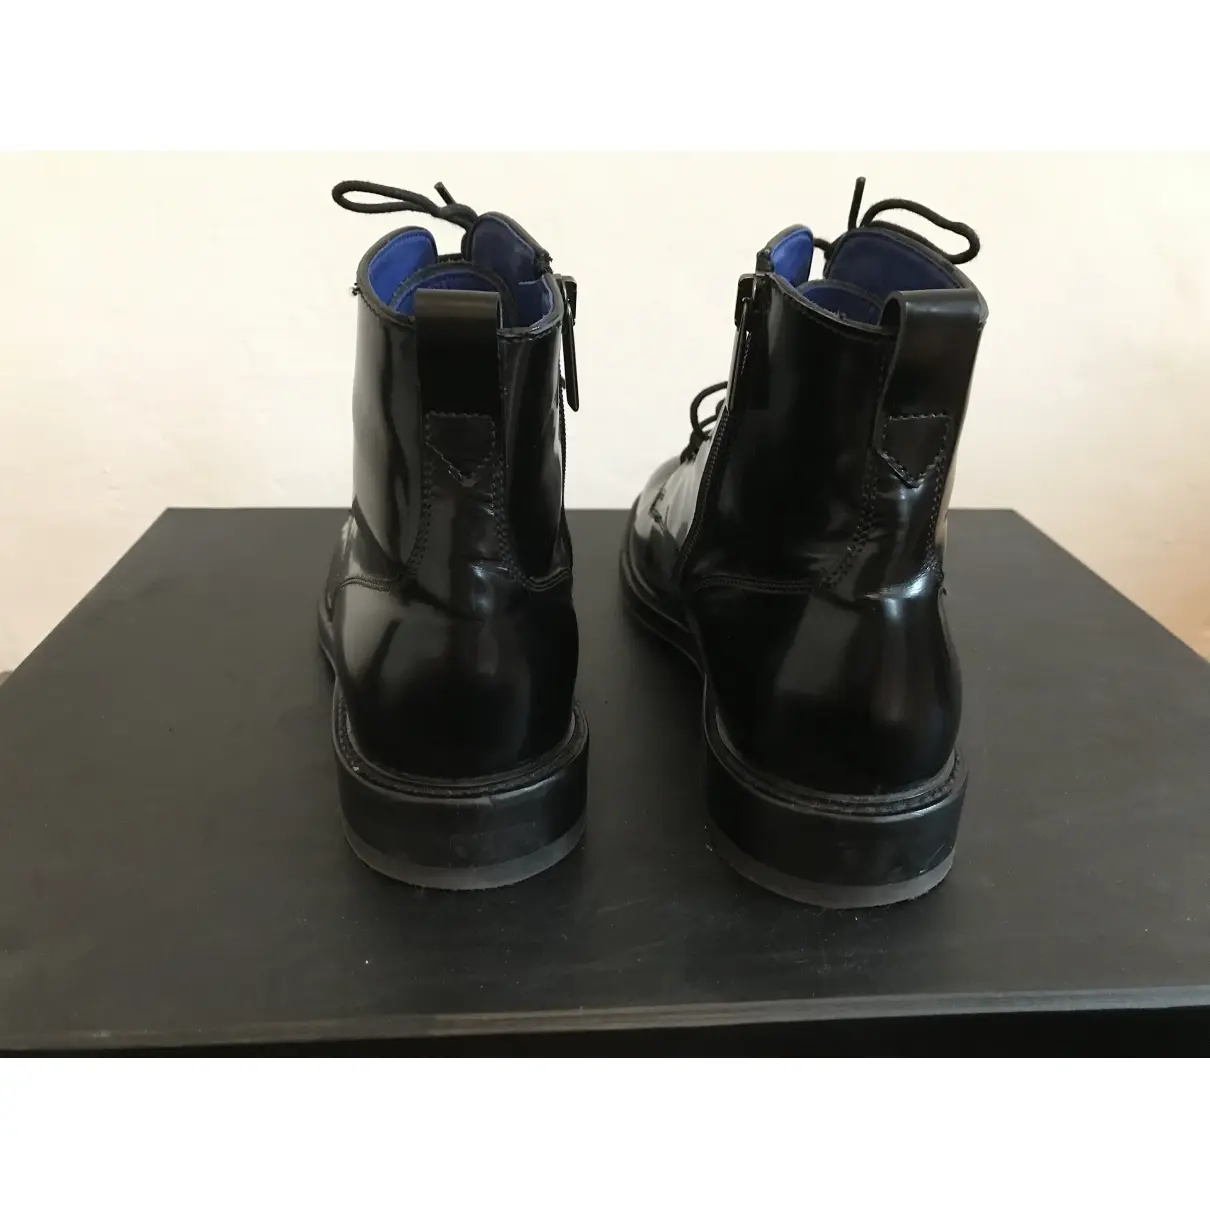 Rizzoli Patent leather lace ups for sale